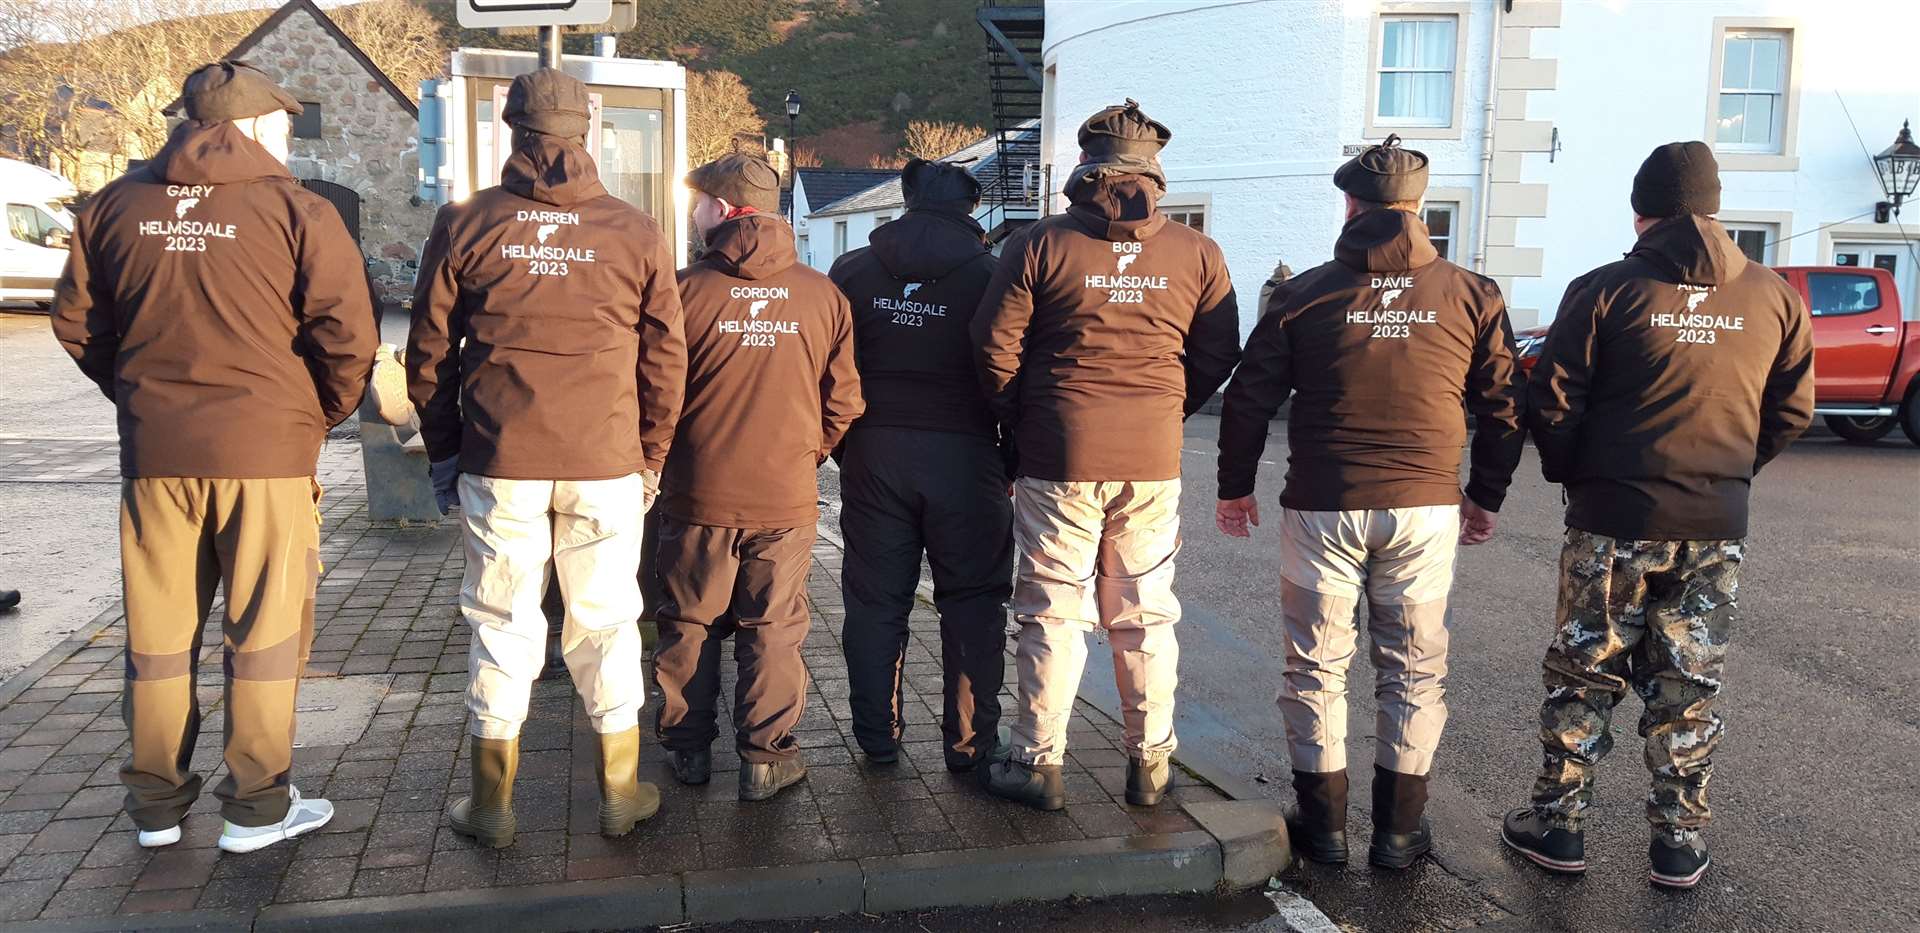 The friends show off the wording on the back of their matching jackets – 'Helmsdale 2023'.